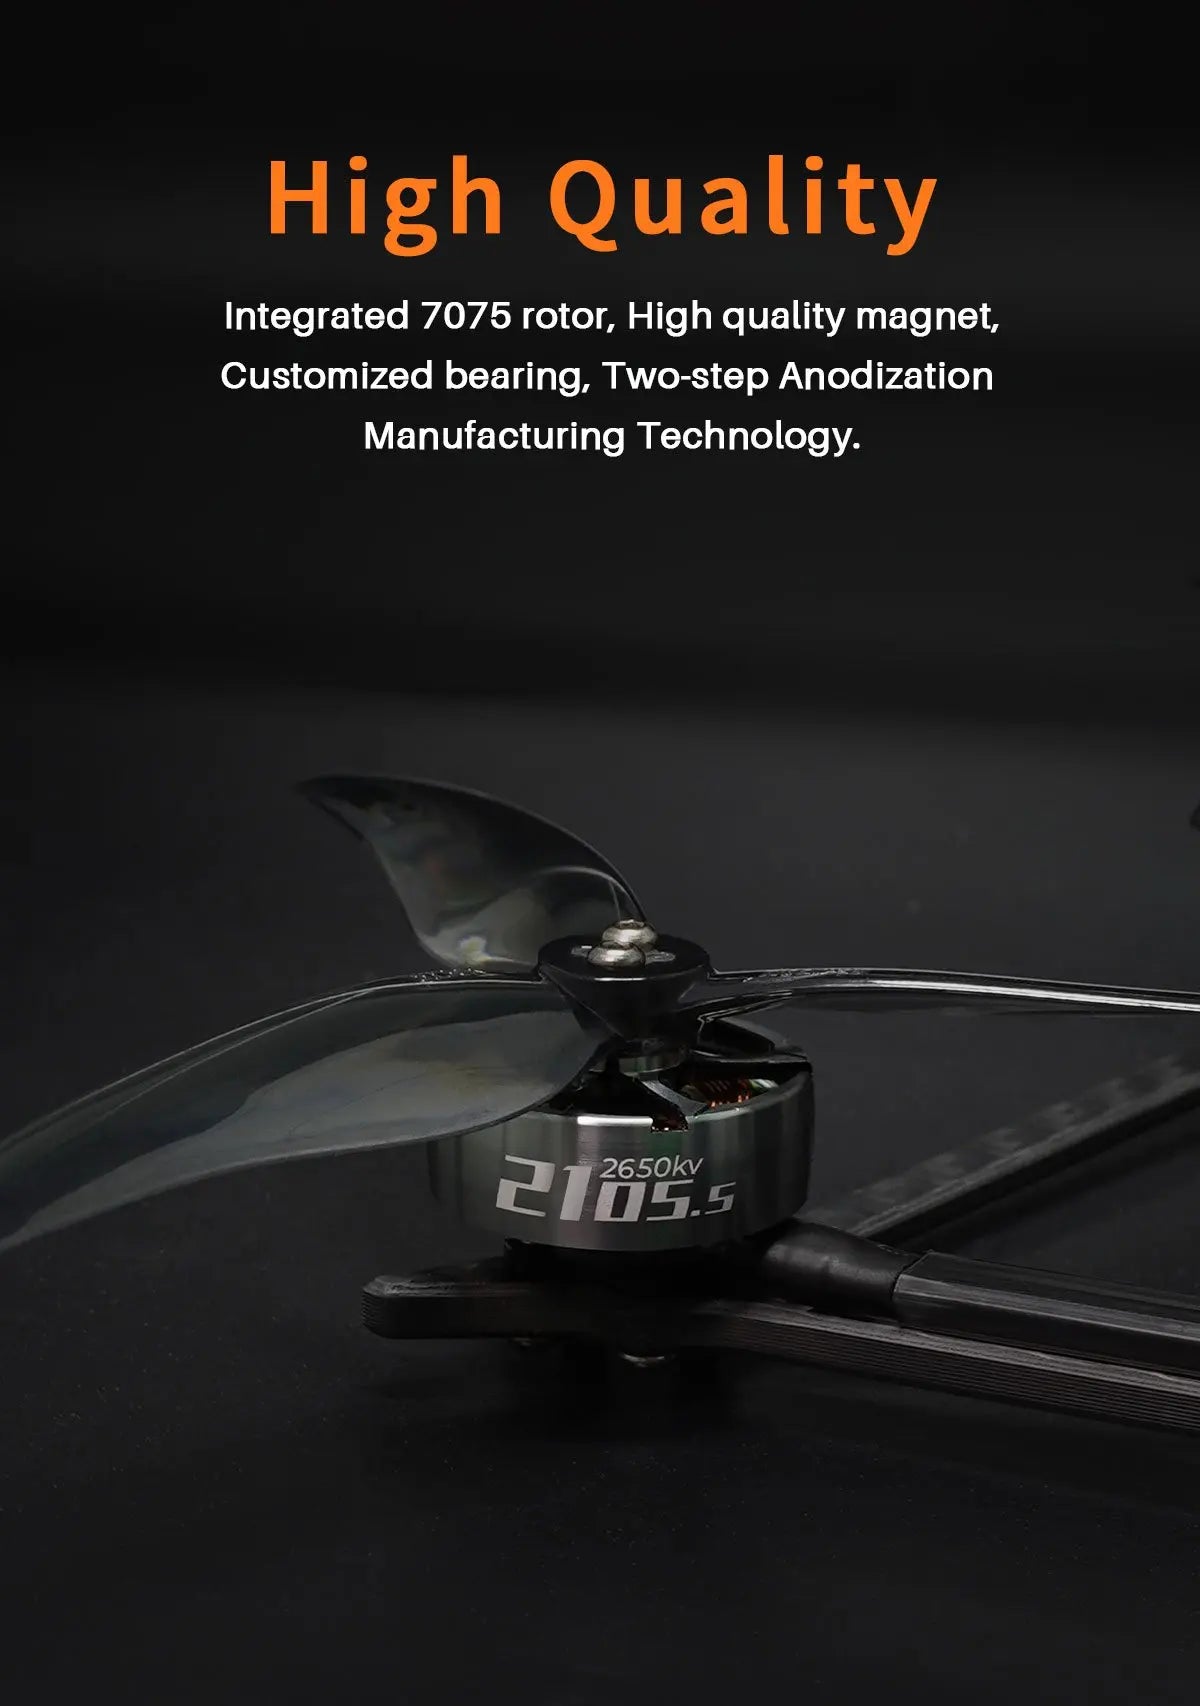 GEPRC SPEEDX2 0803 Brushless Motor, High Quality Integrated 7075 rotor, High quality magnet; Customized bearing; Two